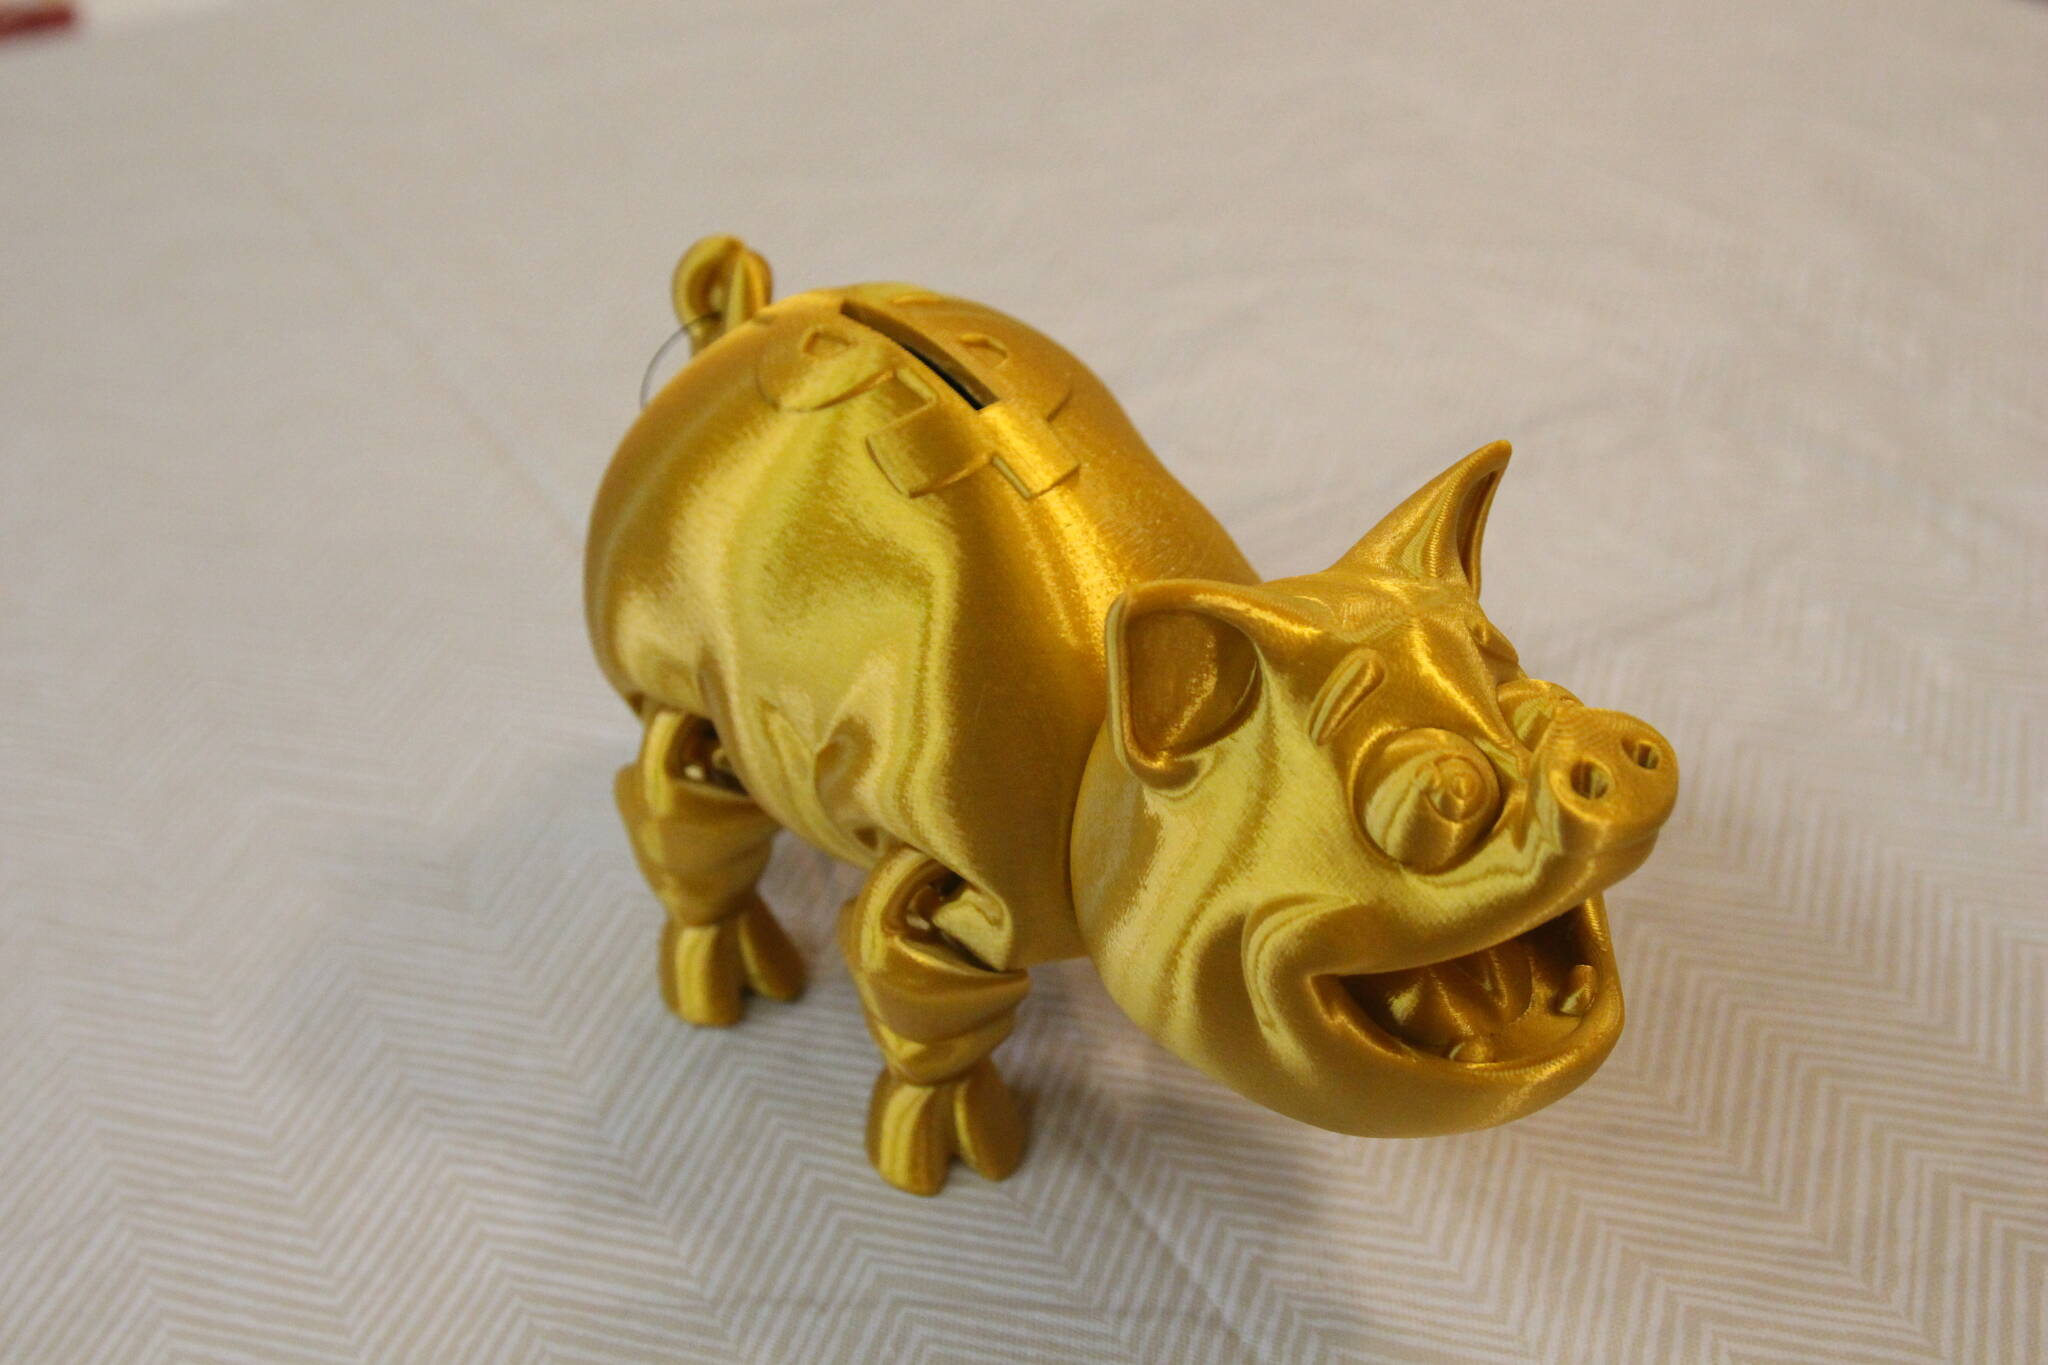 A 3D printed piggy bank, created by Gray Matter and available at Whidbey Island Crafter’s Market Studios, along with other 3D printed sculptures. (Photo by Luisa Loi)